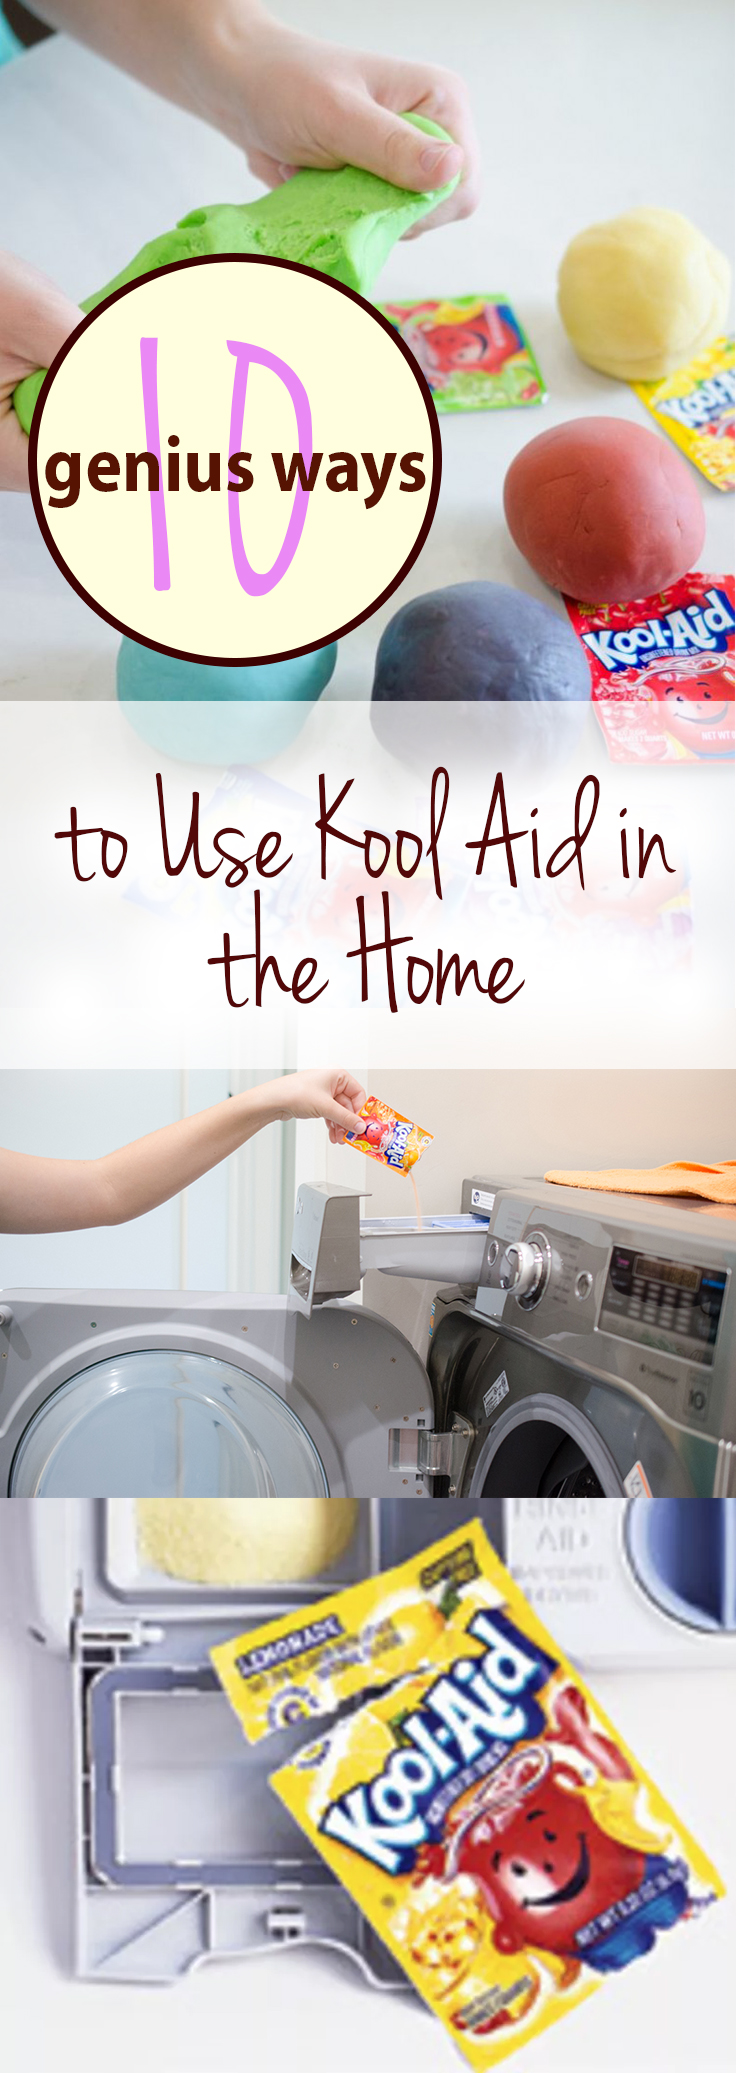 Kool Aid, Things to Do With Kool Aid, Home Hacks, Life Tips, Cleaning Tips and Tricks, Easy Cleaning Hacks, Uses for Kool Aid.